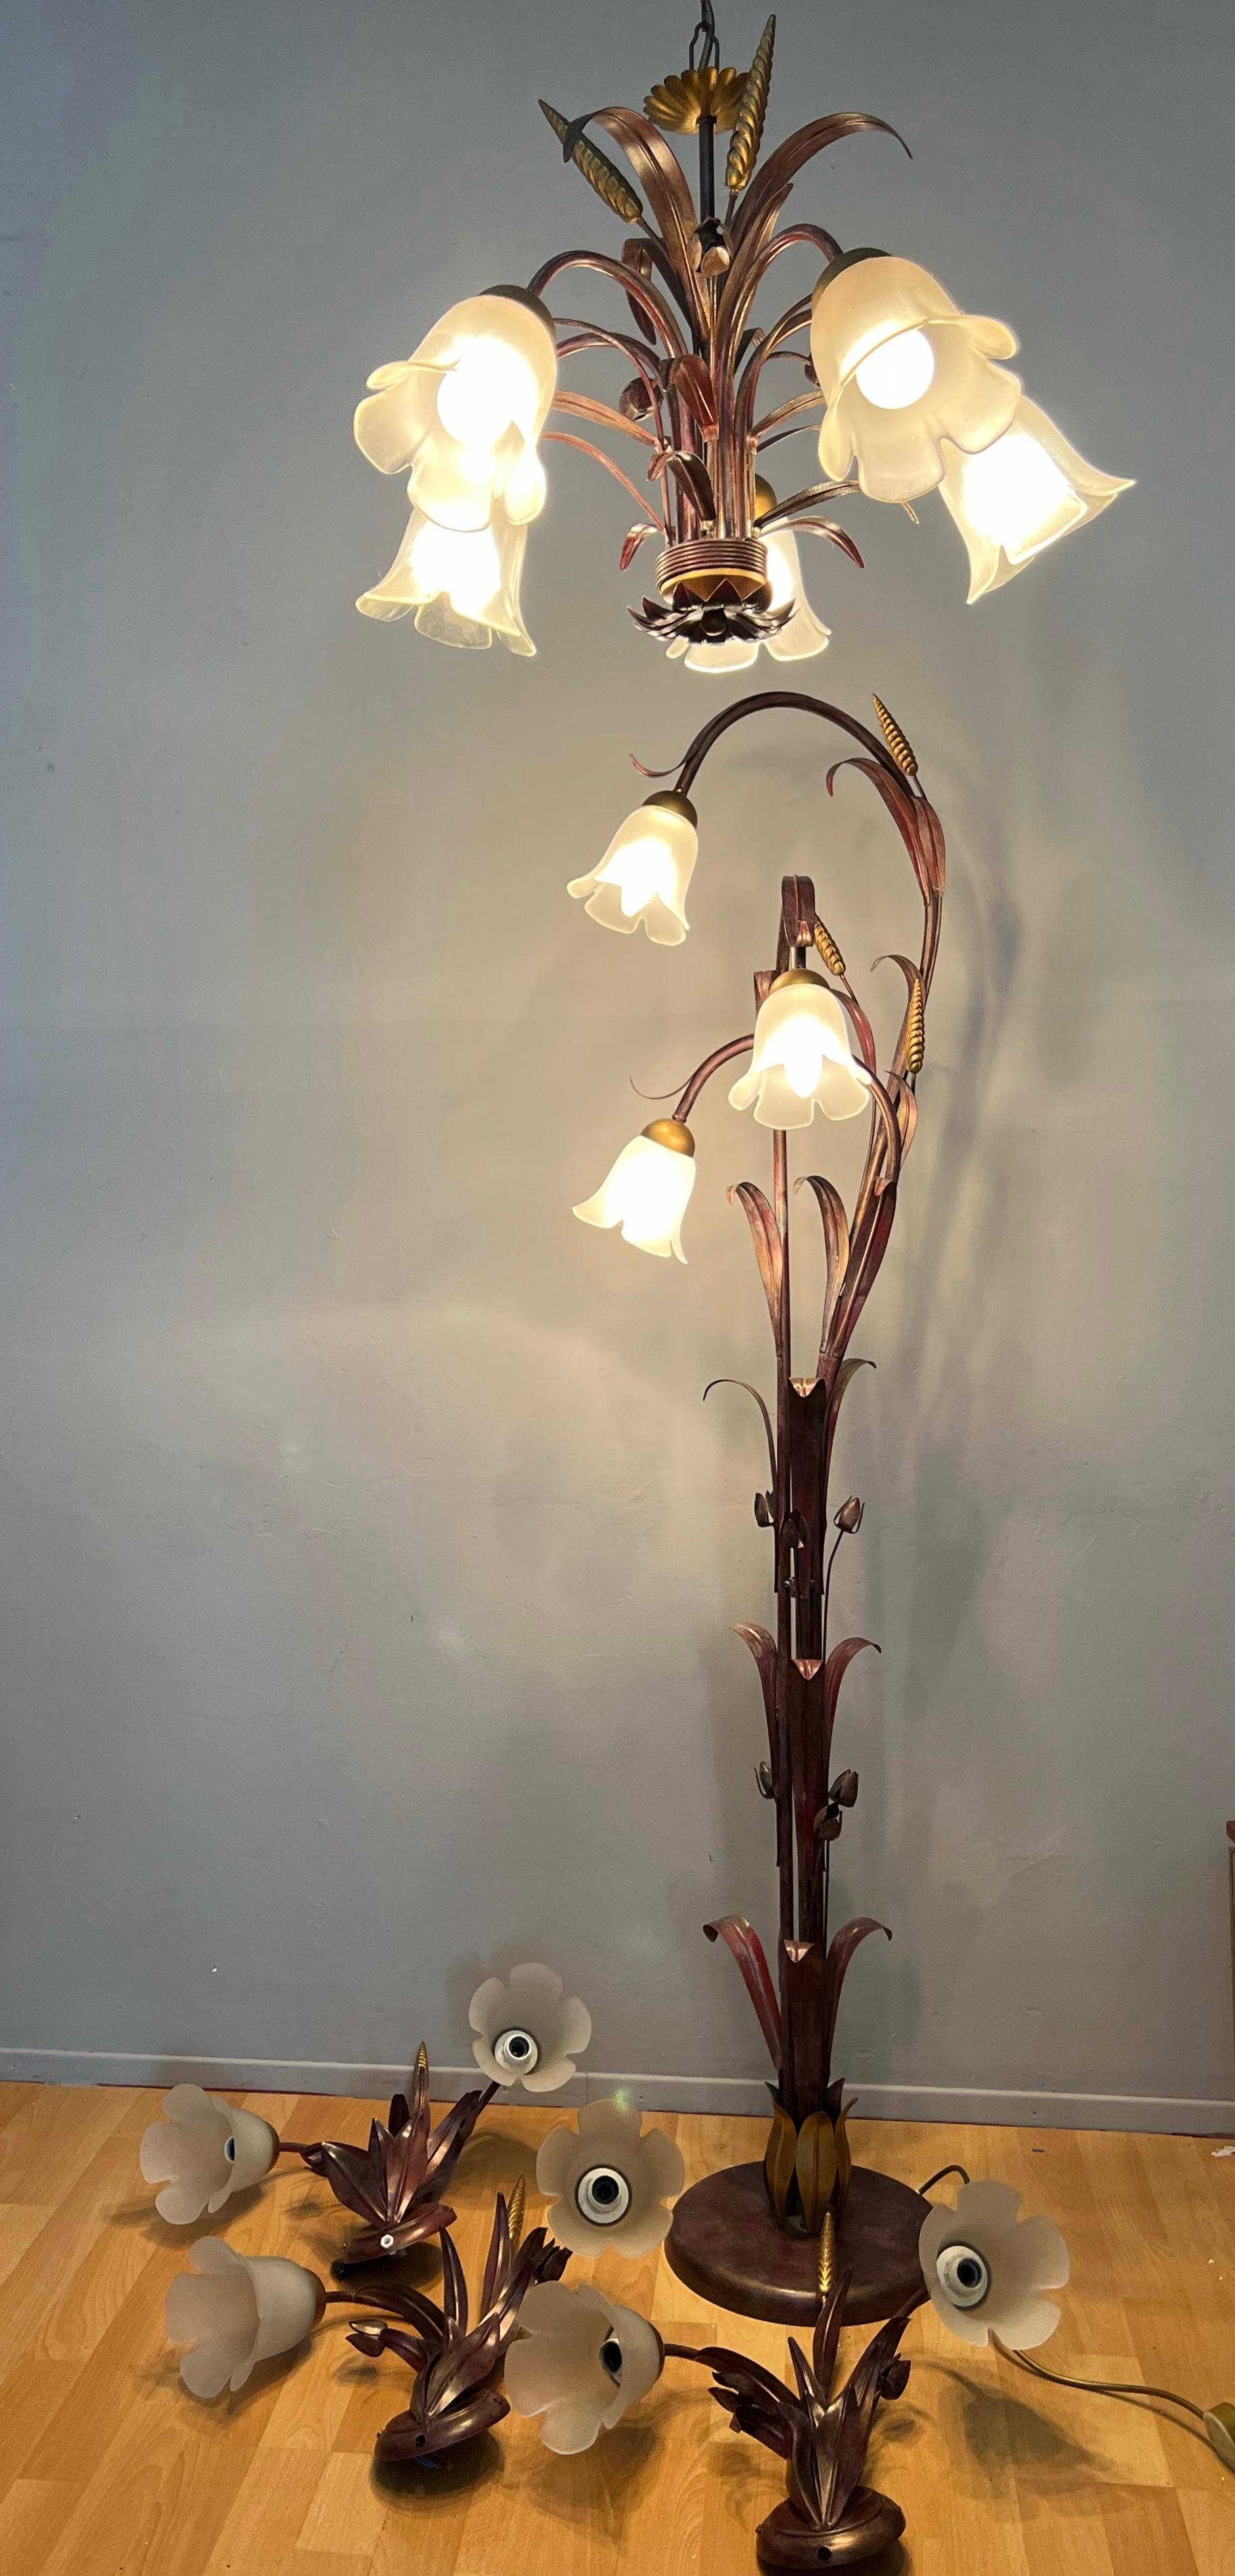 Very stylish and beautifully handcrafted, mid-century pendant, floor lamp and 3 wall sconces.

Over the years we have sold one such pendant, but we had never seen its matching floor lamp and sconces and to have found this unique set of 5 in such